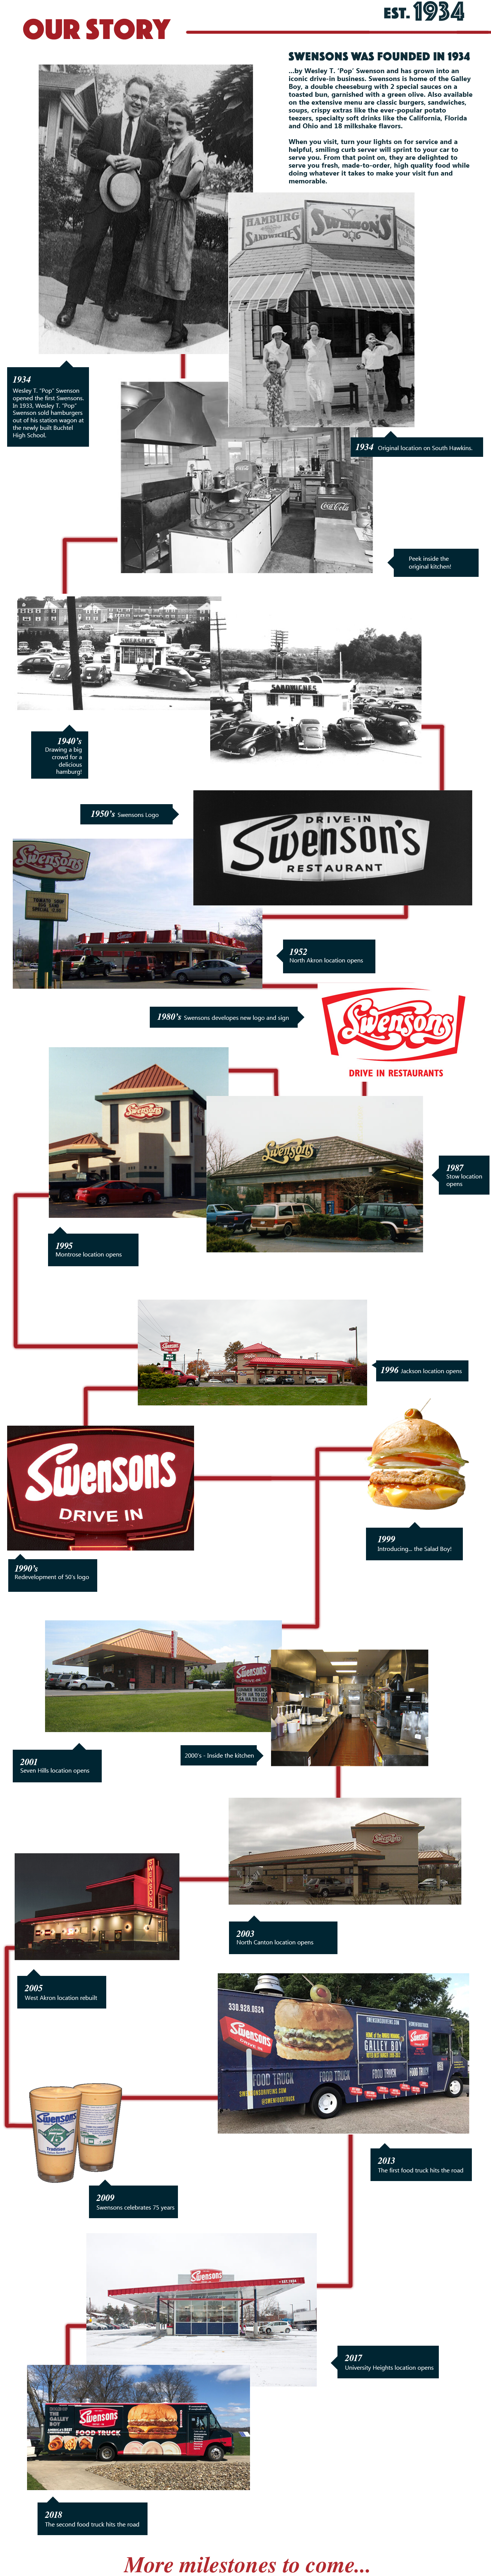 The Swensons Drive-In story, Established in 1934 by Wesley T. "Pop" Swenson, Home Of The Galley Boy®, "Americas Best Cheeseburger"